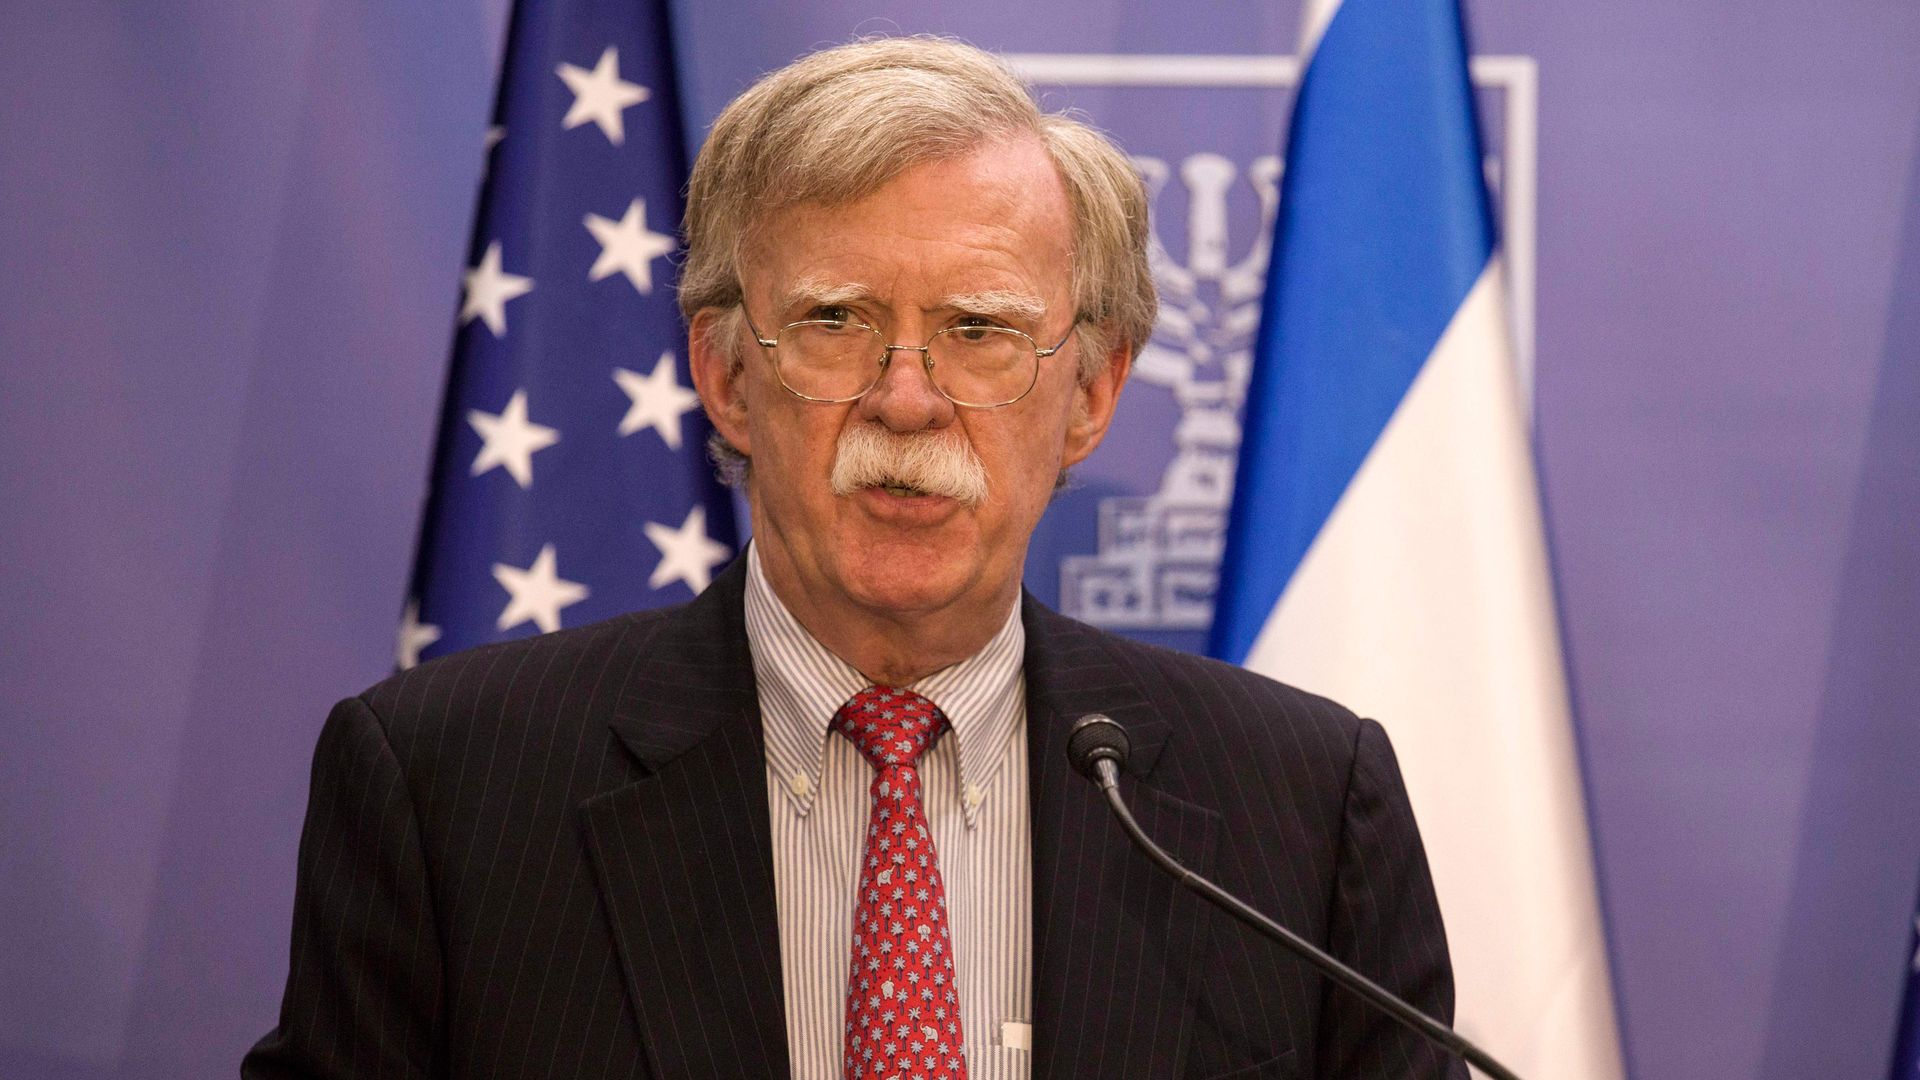 John Bolton says military action against Iran is still on the table - Axios